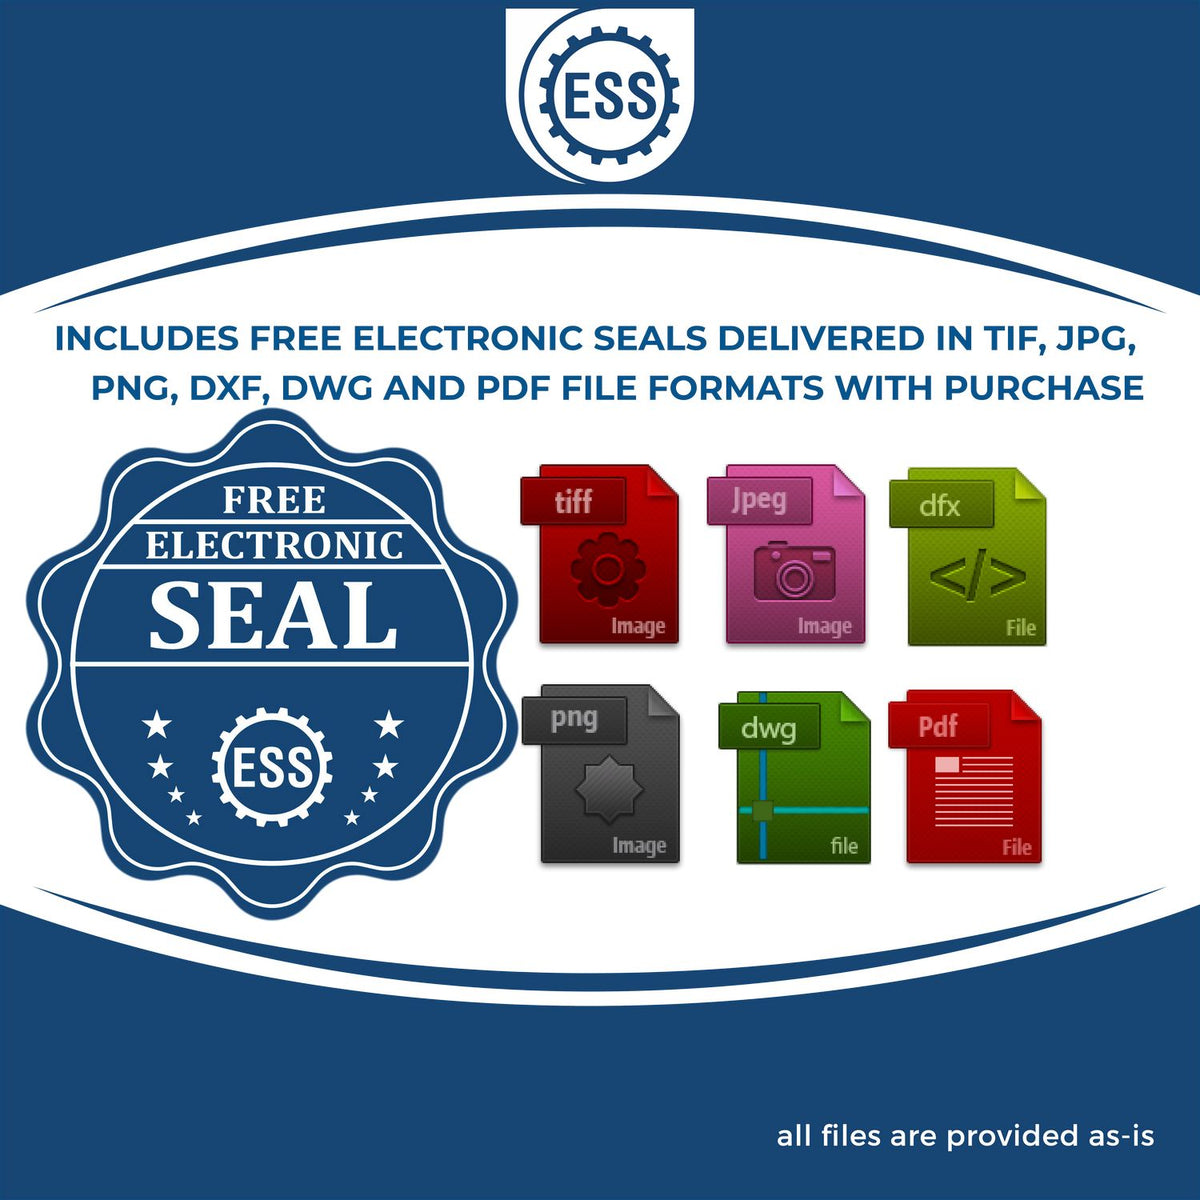 An infographic for the free electronic seal for the Alaska Desk Architect Embossing Seal illustrating the different file type icons such as DXF, DWG, TIF, JPG and PNG.